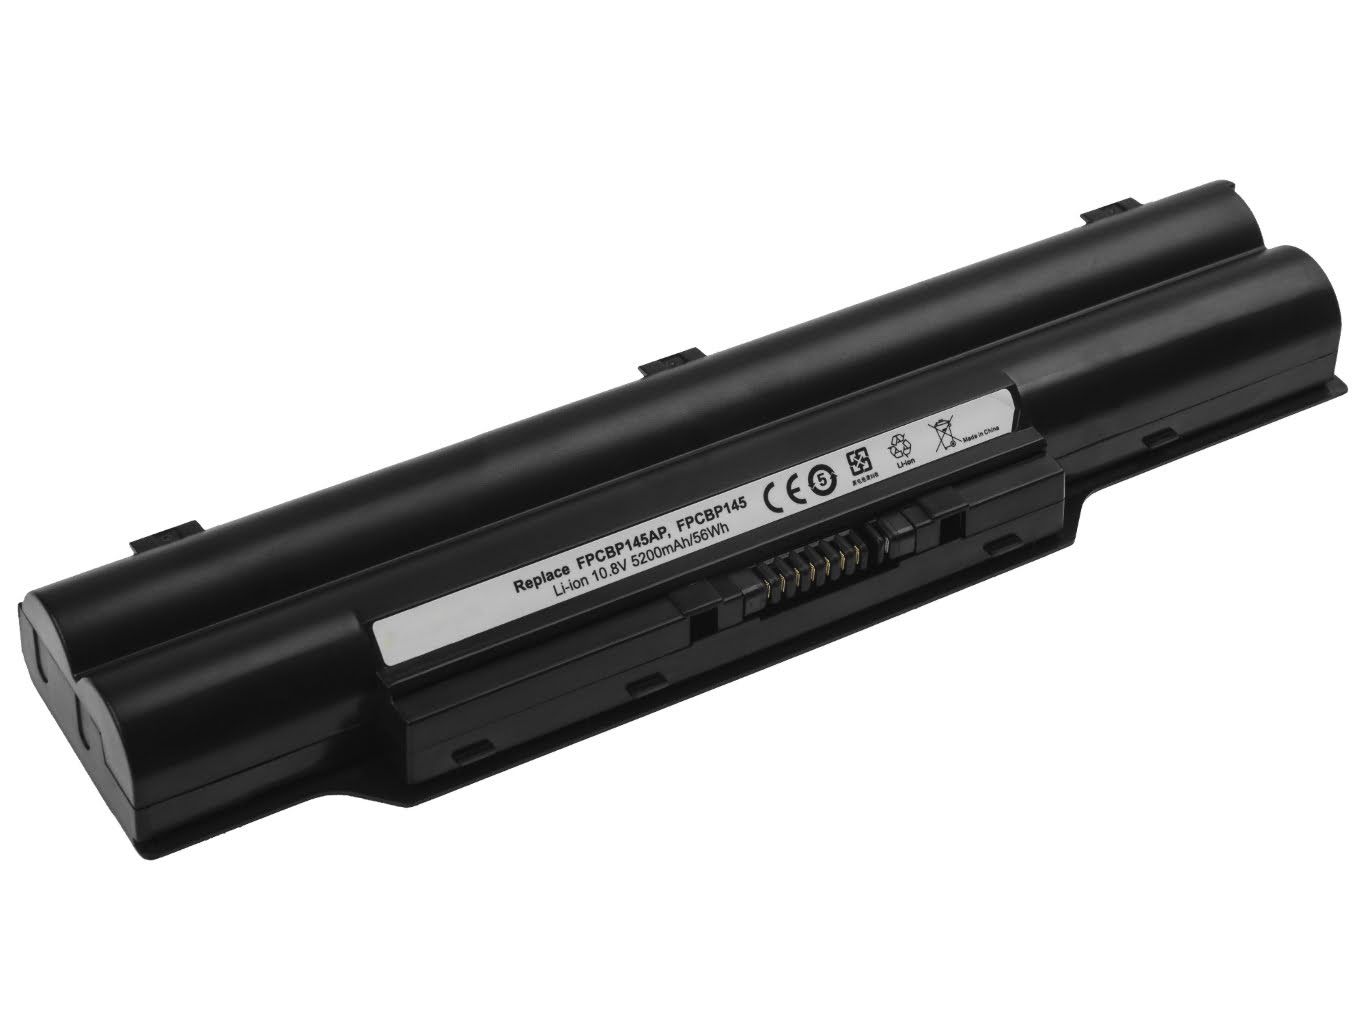 Fujitsu Cp293550-01, Fpcbp220 Laptop Battery For Fmv-biblo Mg/g70, Lifebook E8310 replacement